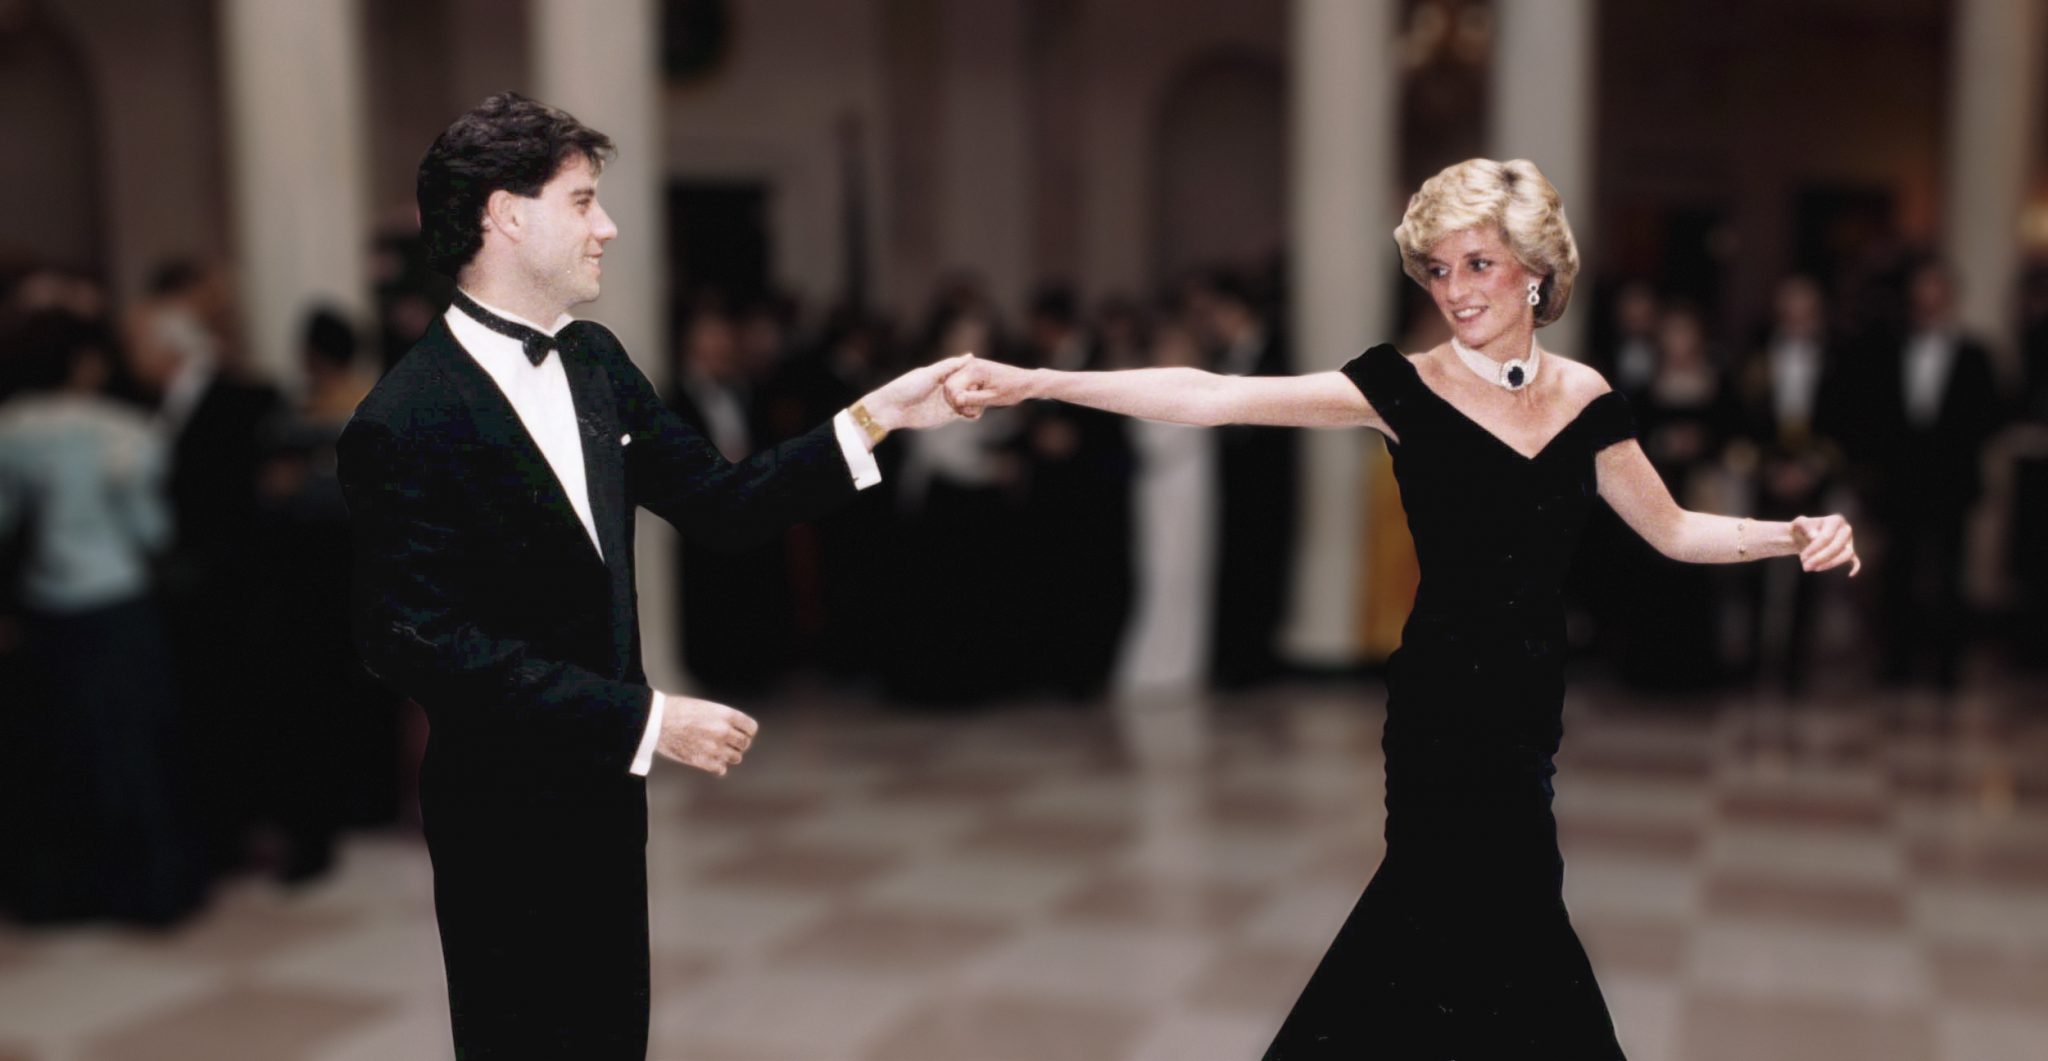 Princess Diana dancing with John Travolta in the White House 1985